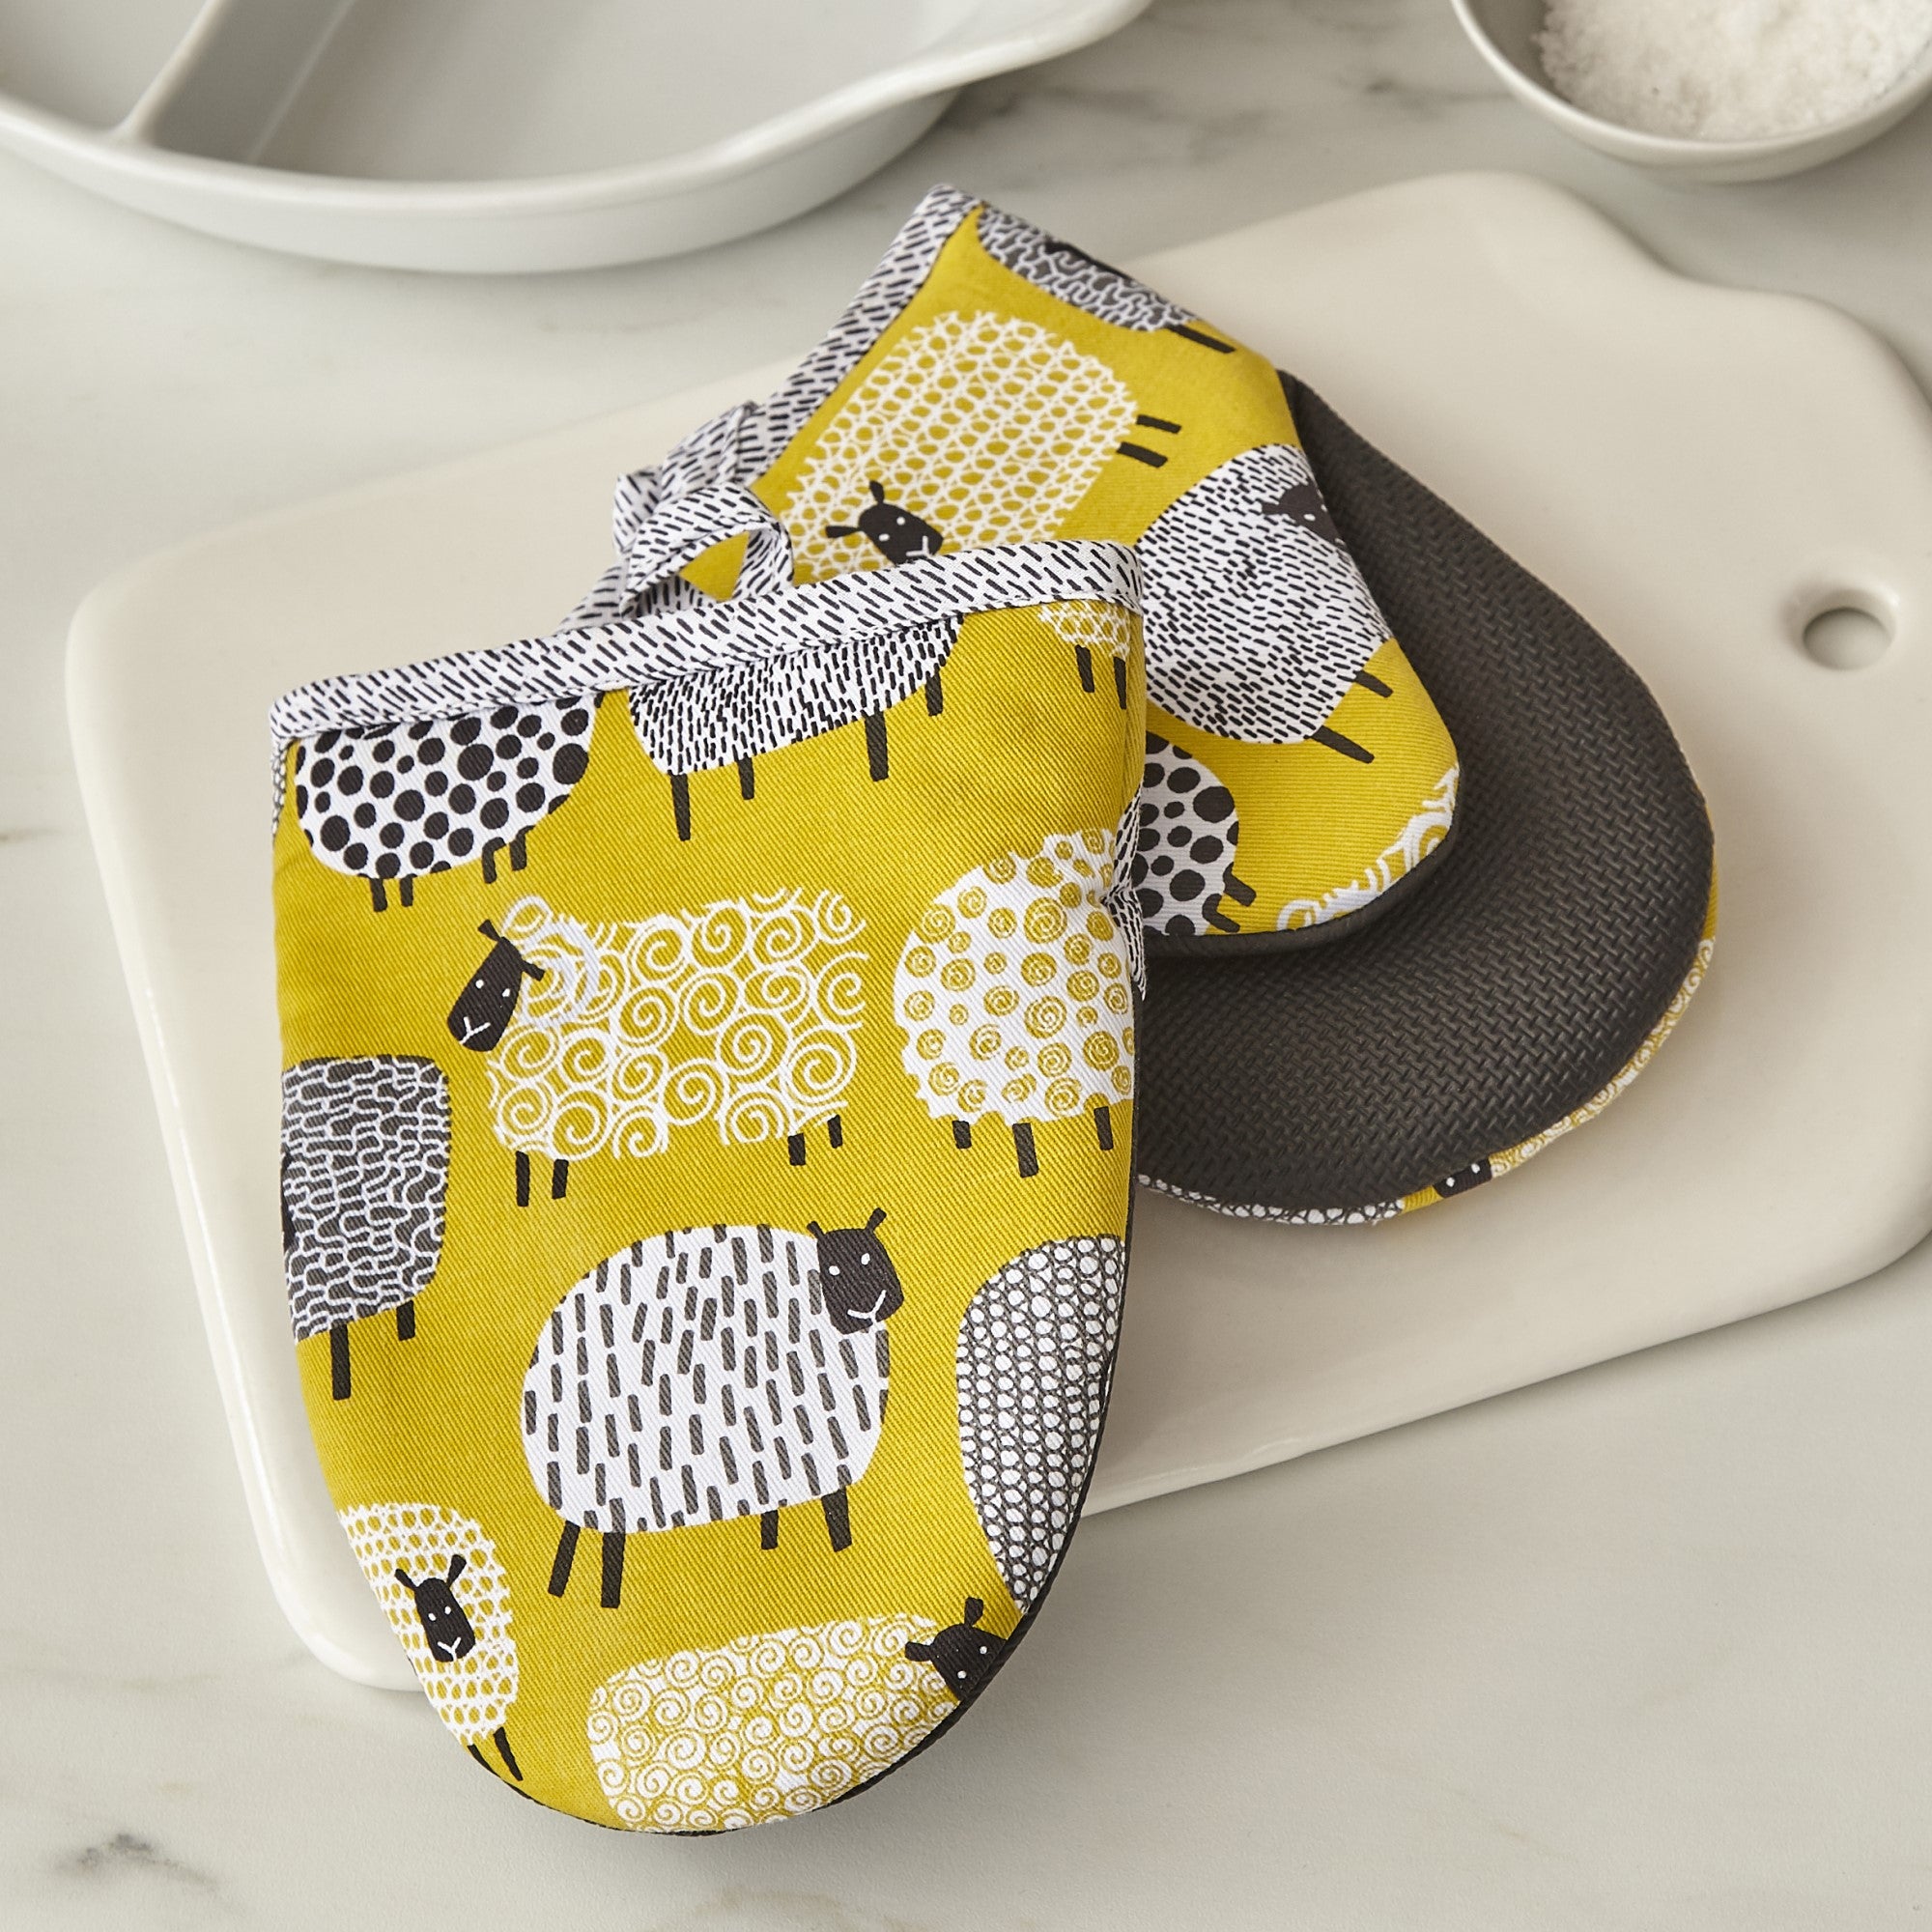 Ulster Weavers Microwave Mitts - Dotty Sheep (100% Cotton Outer with Neoprene Sleeve, Yellow) - Micro Mitts - Ulster Weavers